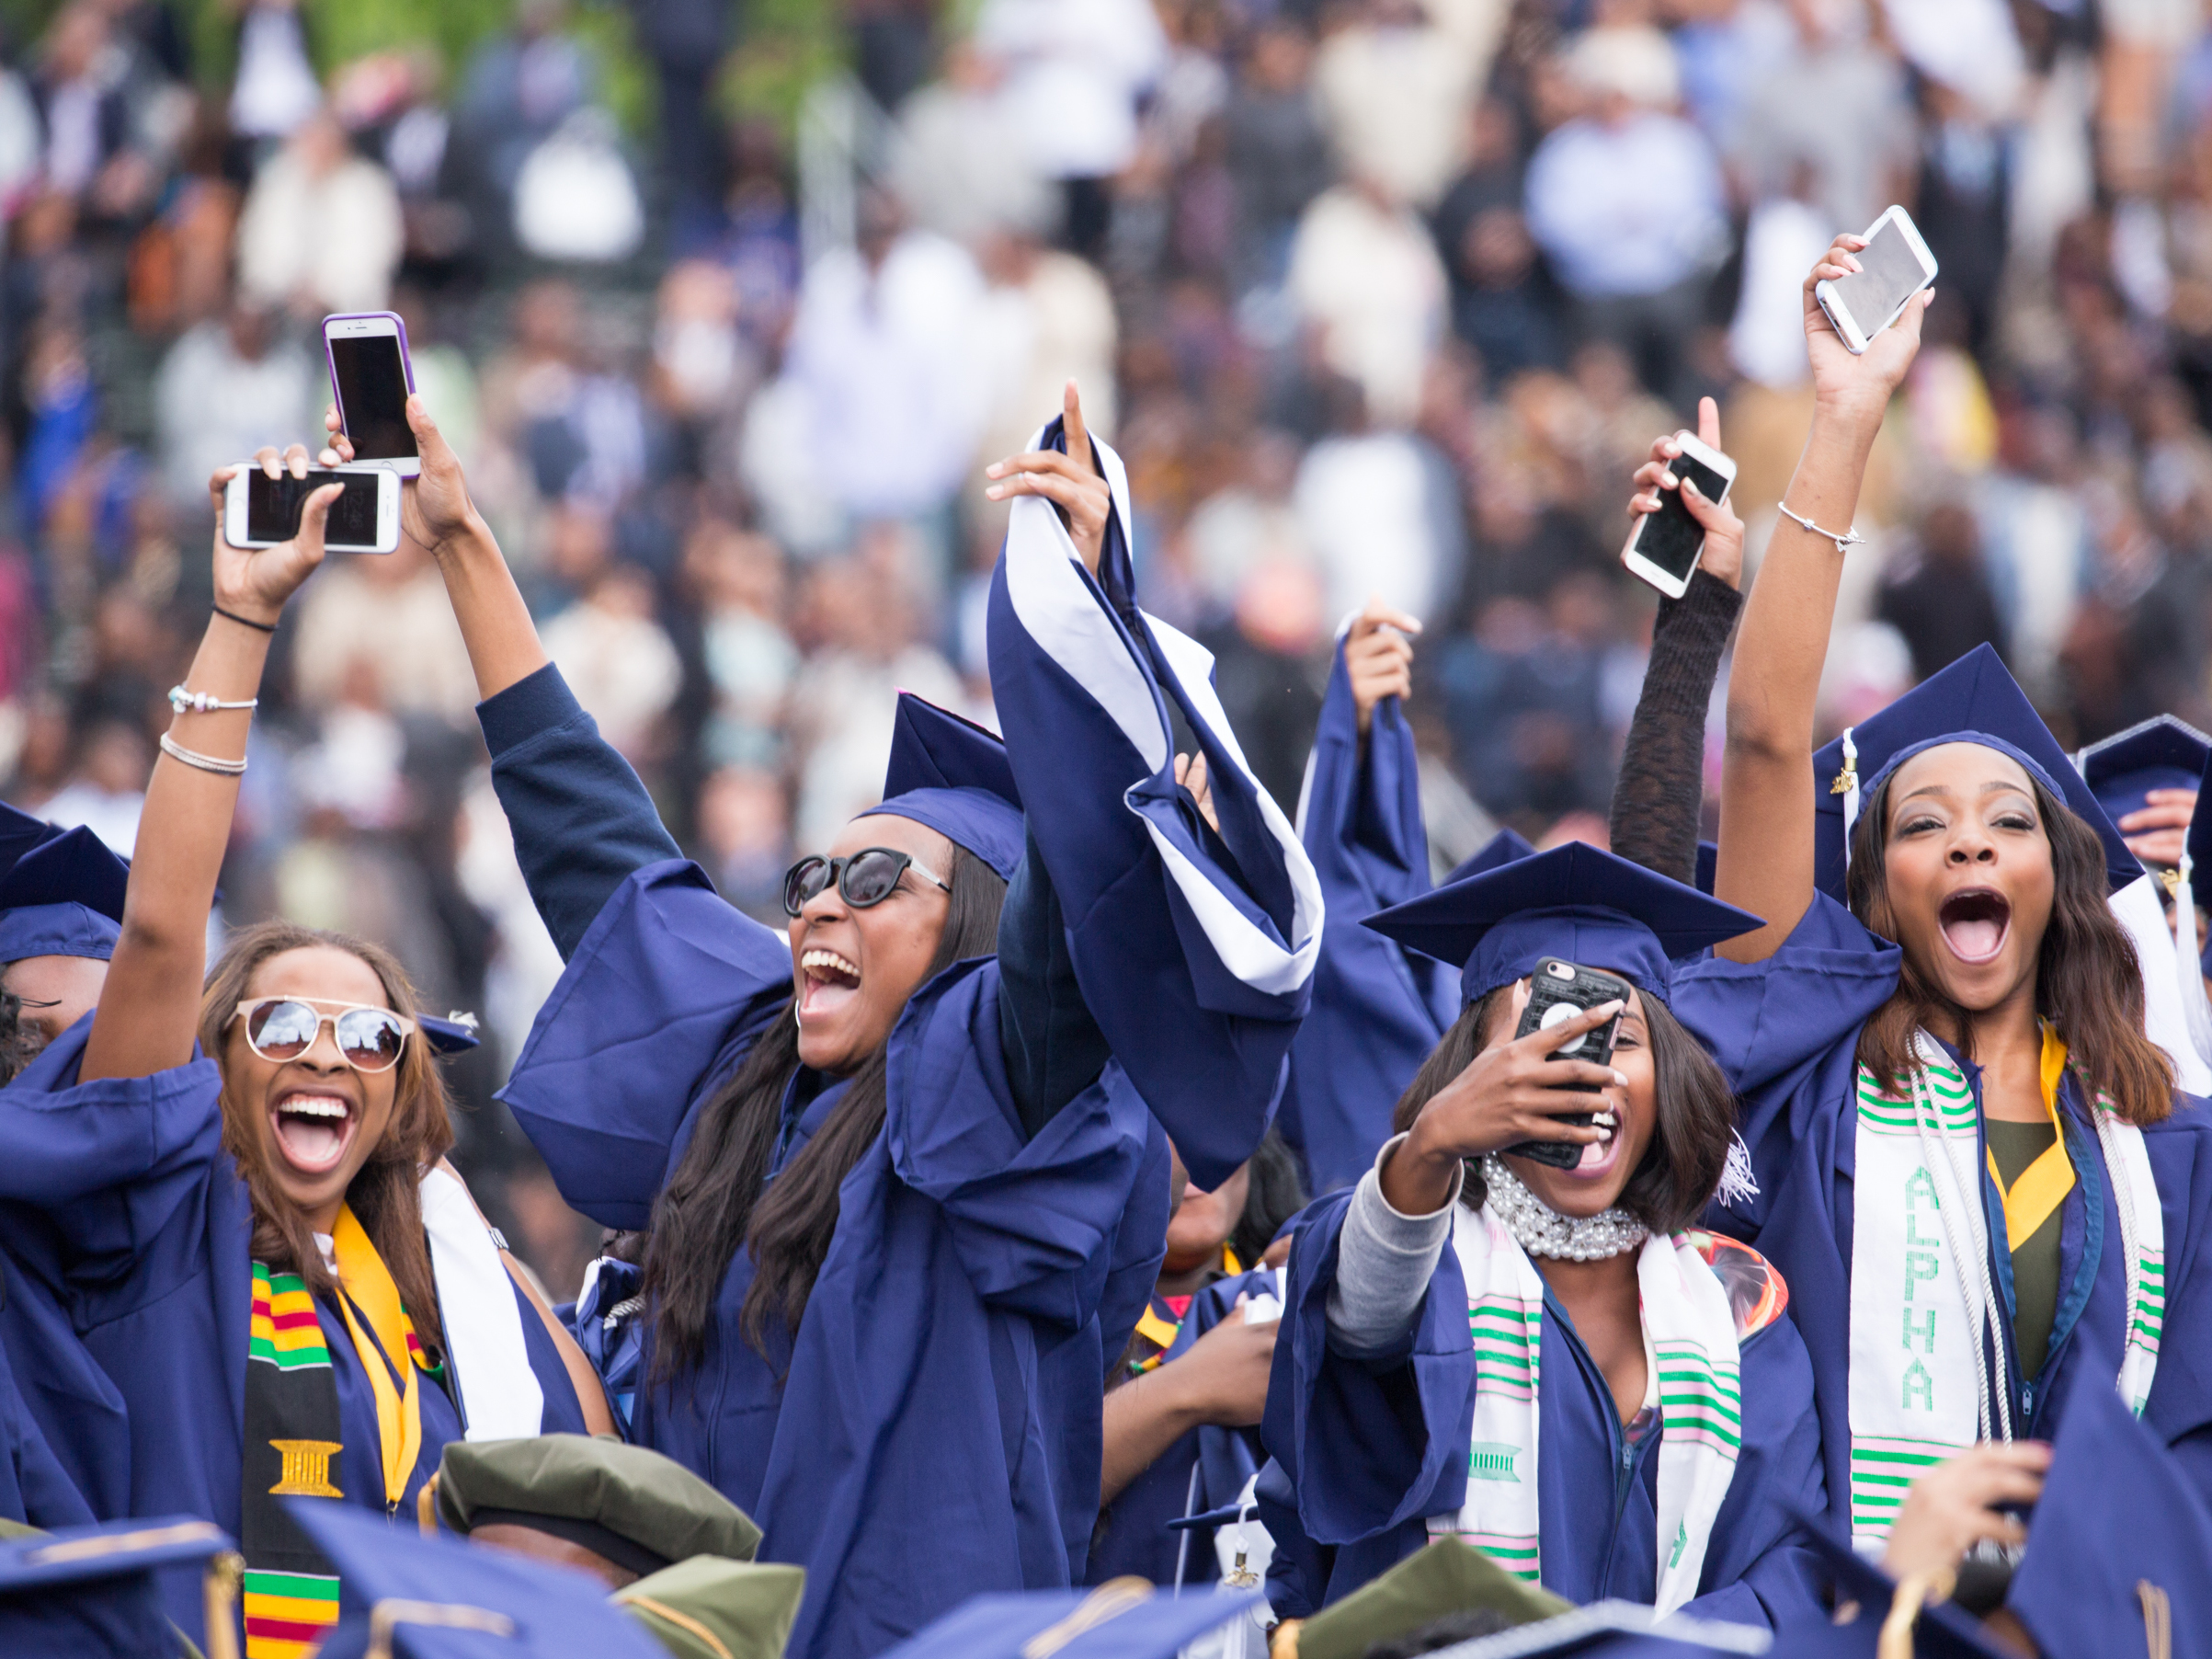 Is 'Diversity' Destroying The HBCUs?